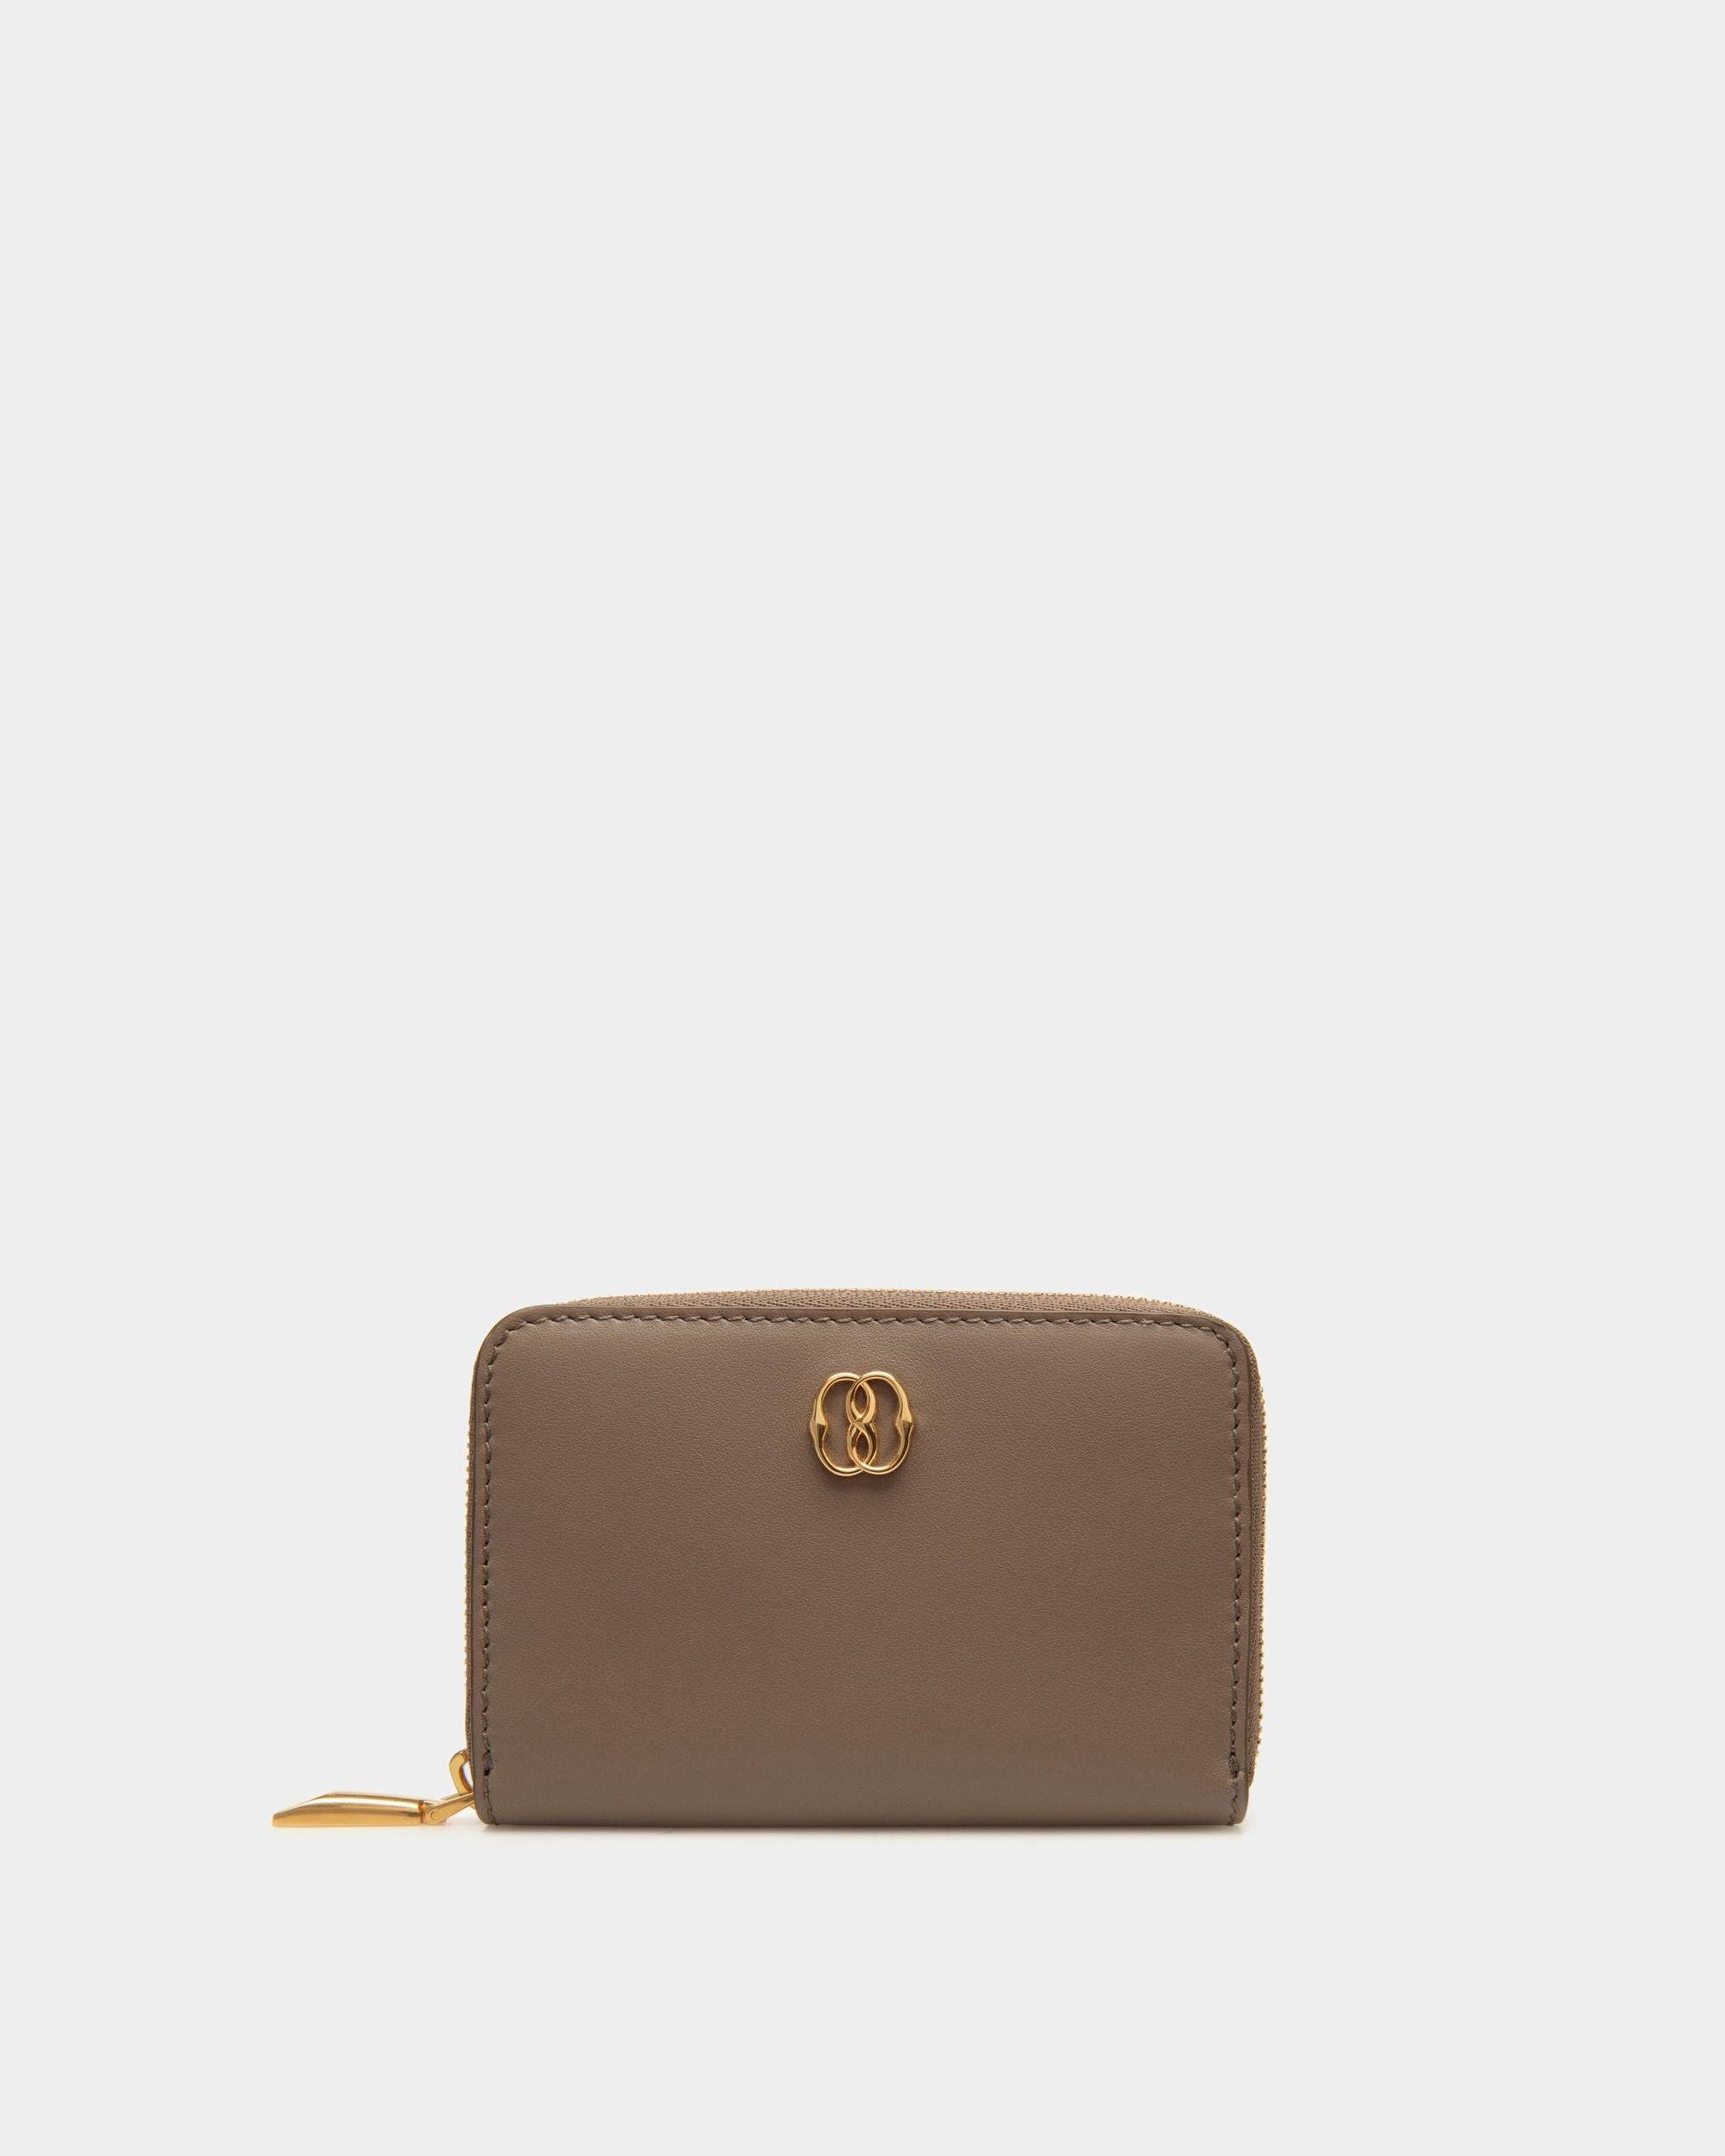 Women's Emblem Coin & Card Wallet in Beige Leather | Bally | Still Life Front